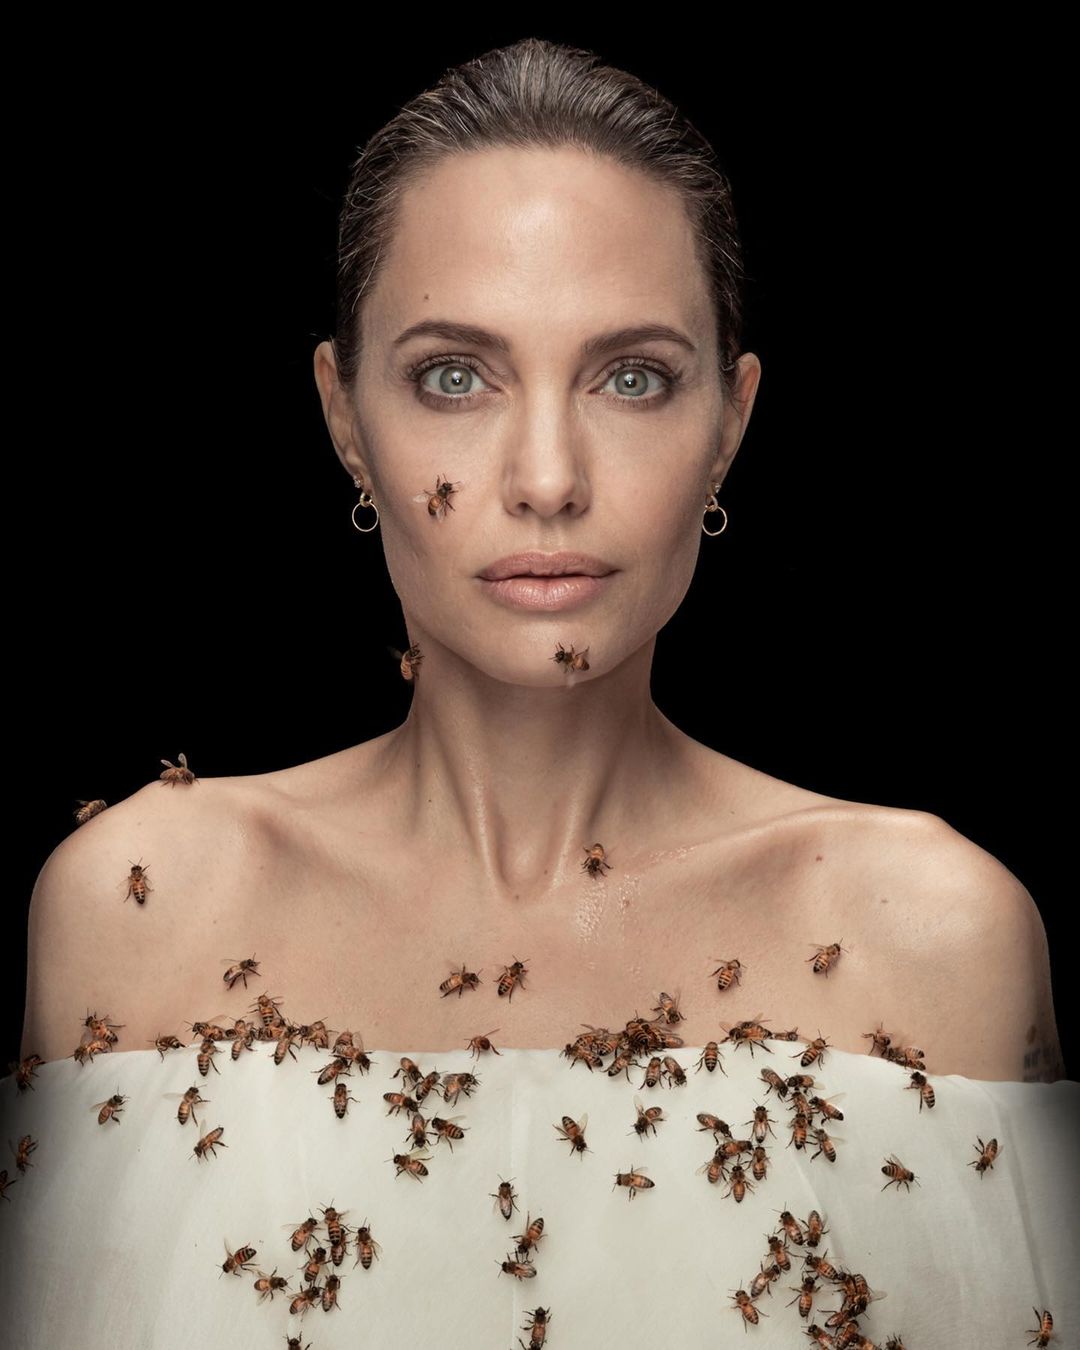 Angelina Jolie: Photographed Included in bees